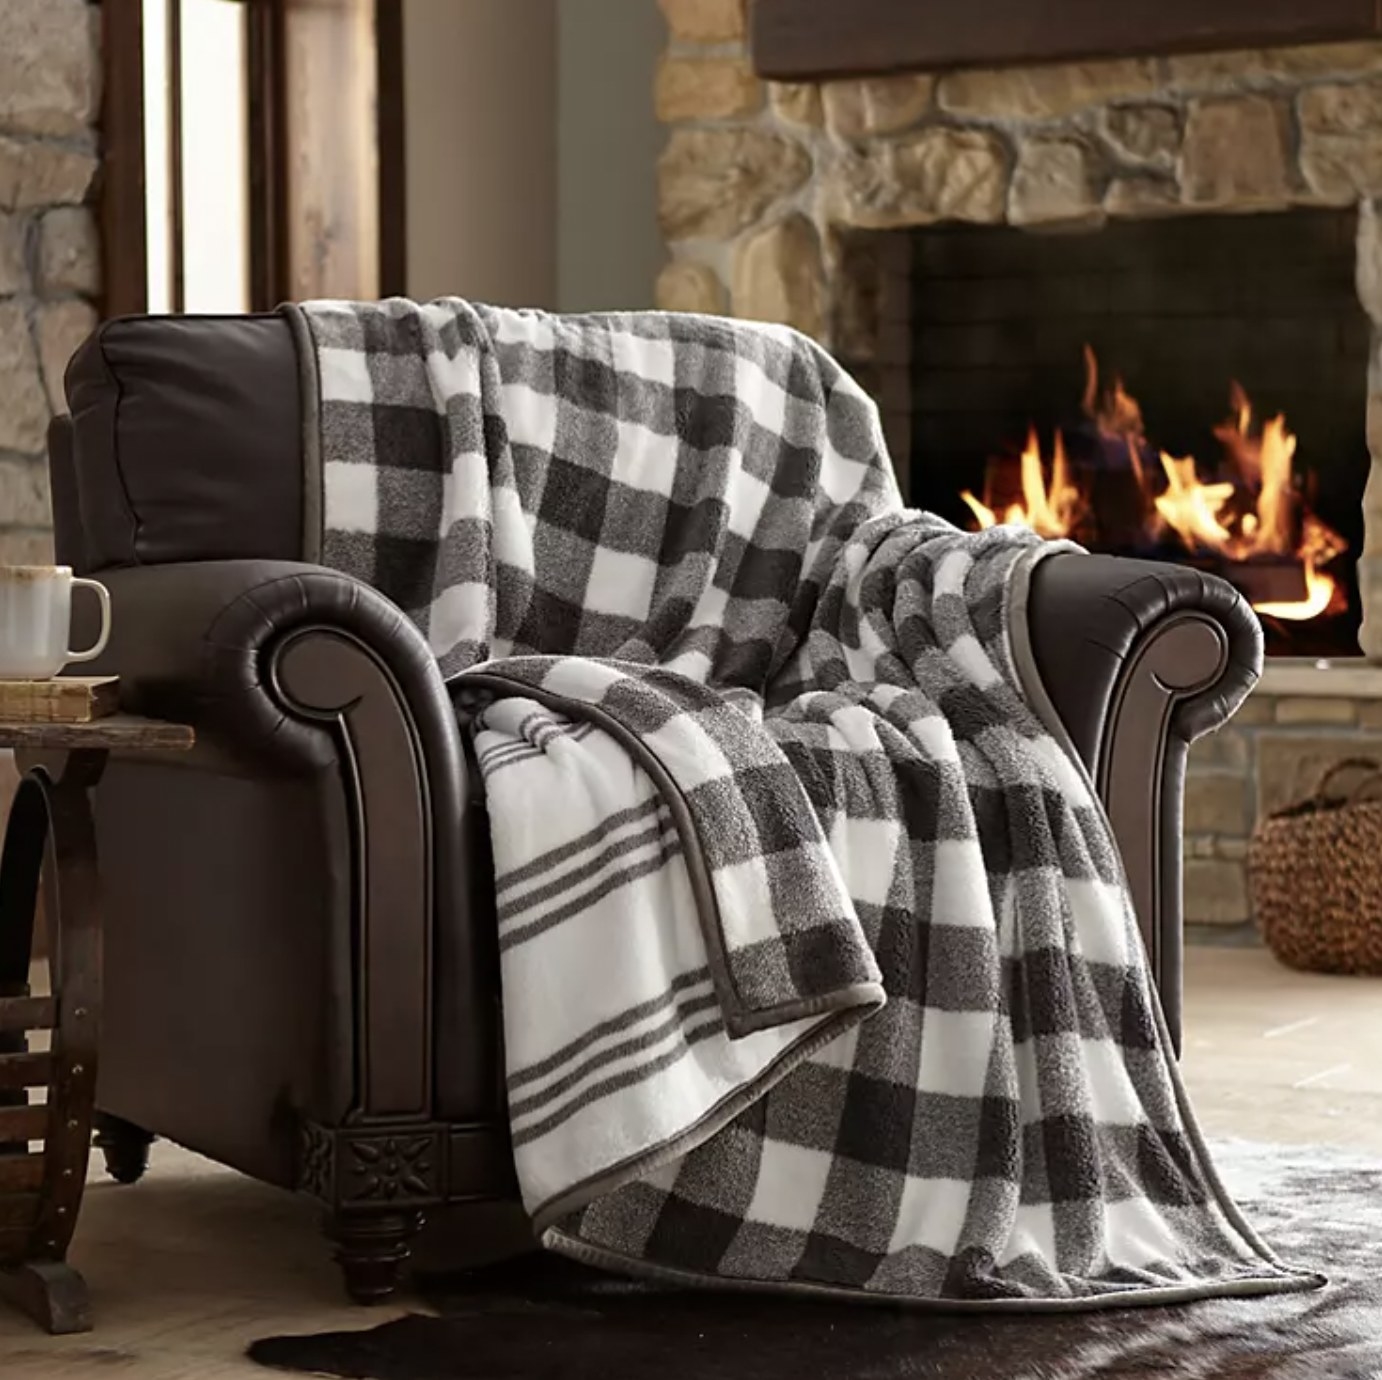 The grey and white throw draped over armchair with plaid pattern on one side and stripes on the other